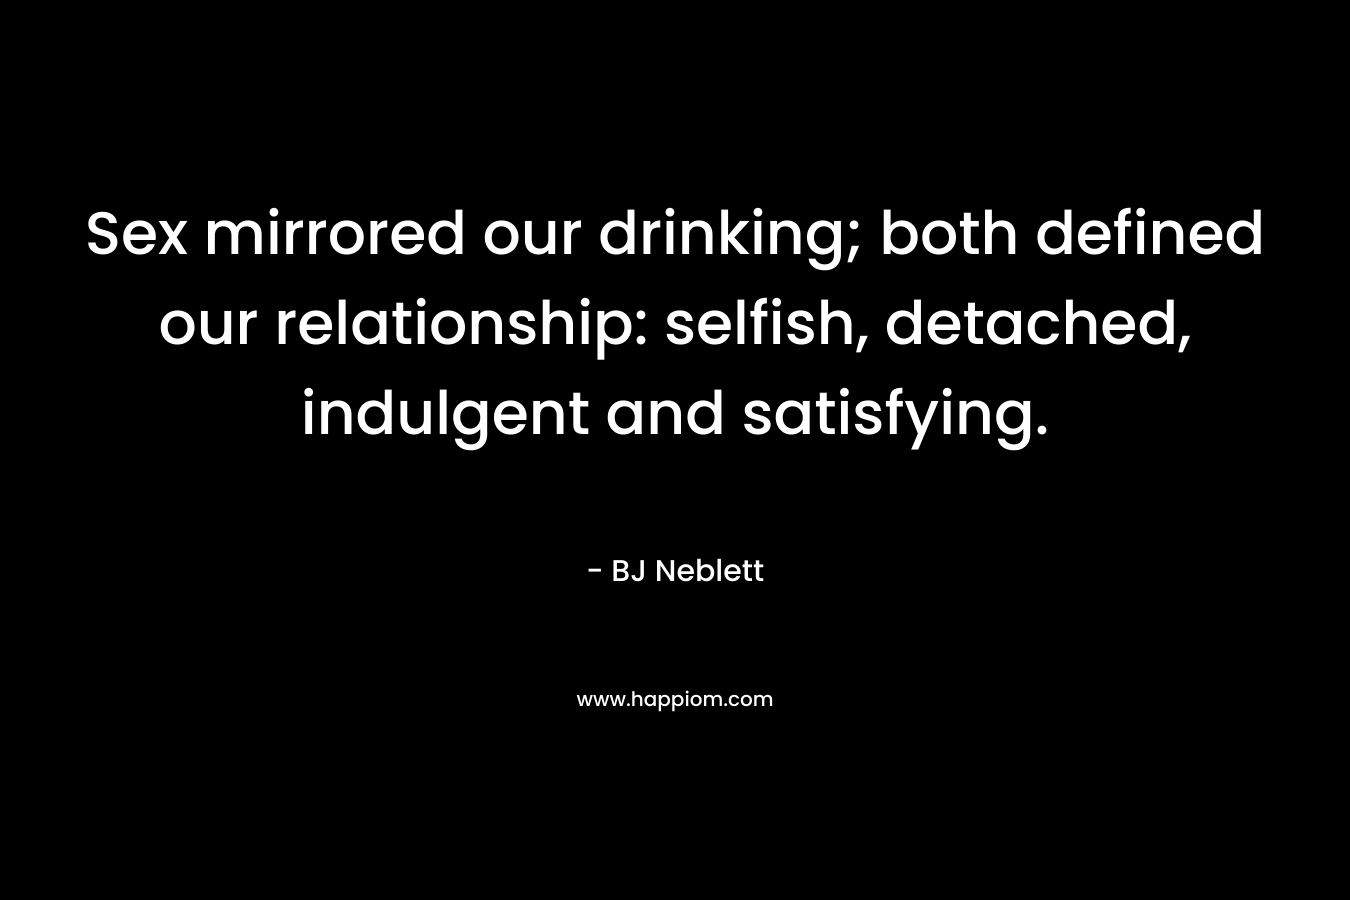 Sex mirrored our drinking; both defined our relationship: selfish, detached, indulgent and satisfying. – BJ Neblett